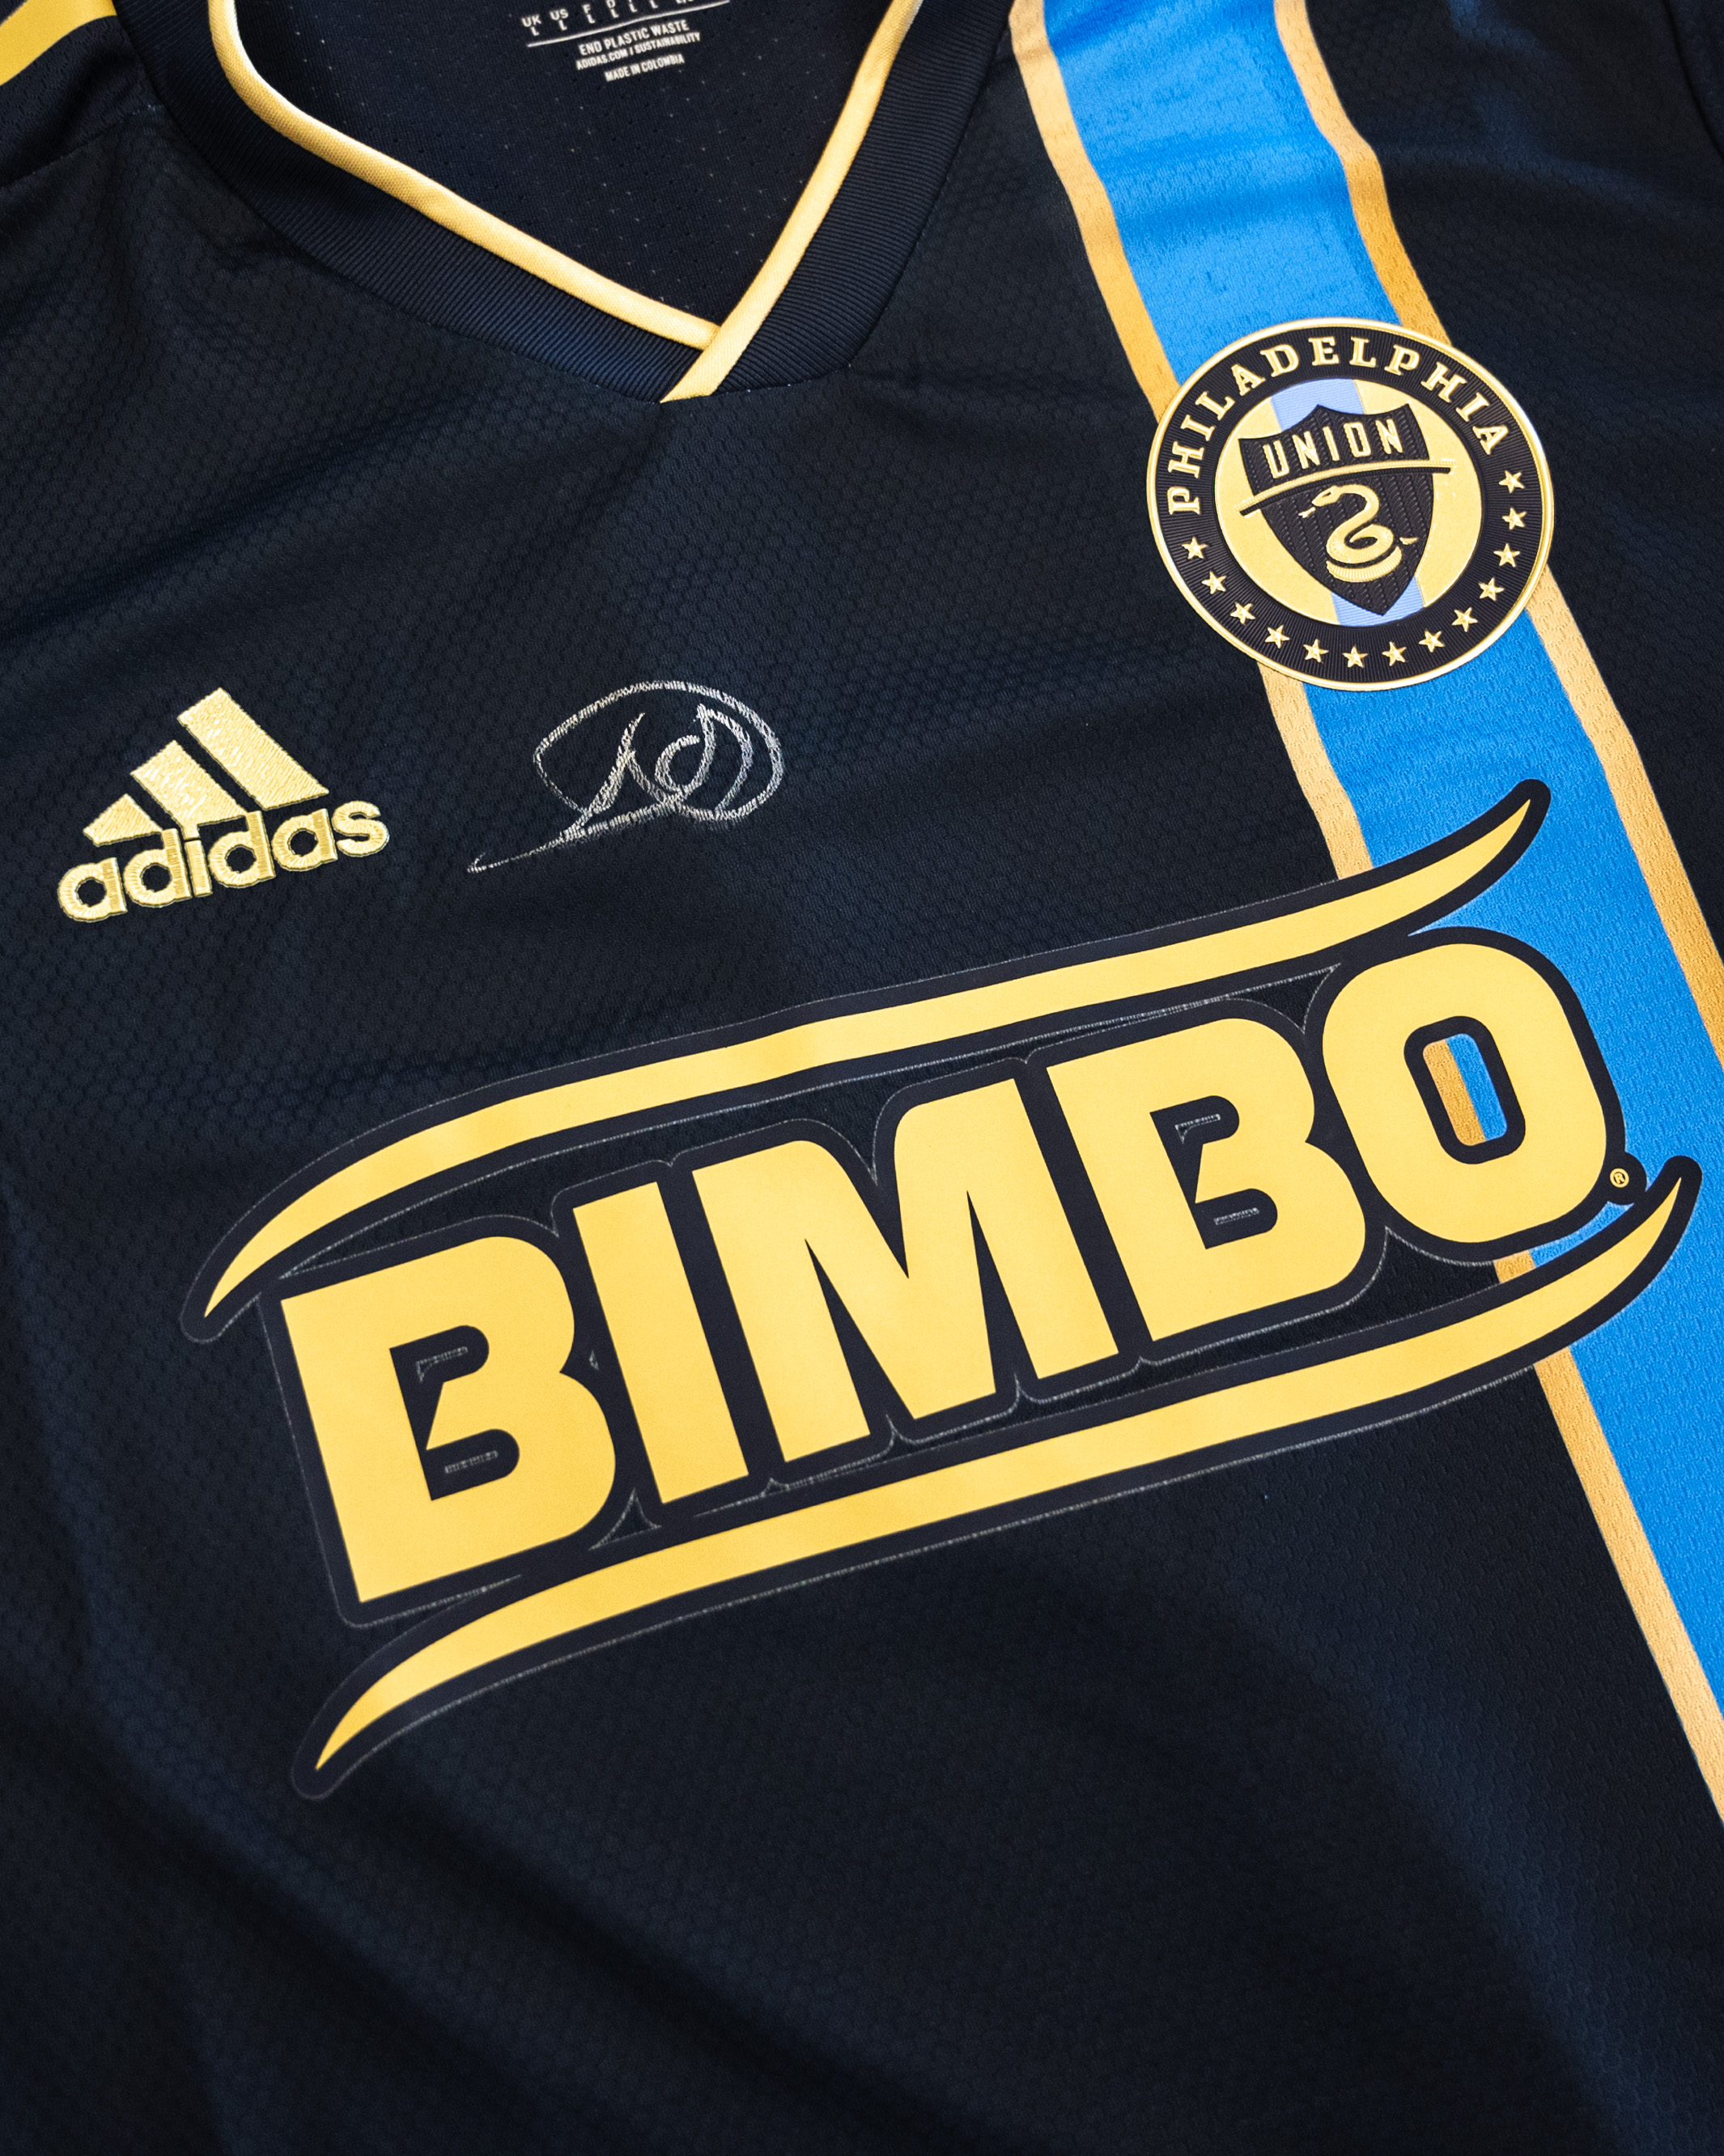 X - Philadelphia Union on X: Jersey signed by Tai Baribo giveaway! ✍️ 🔁  RT this tweet 💬 tag a friend ✓ entered #DOOP  / X